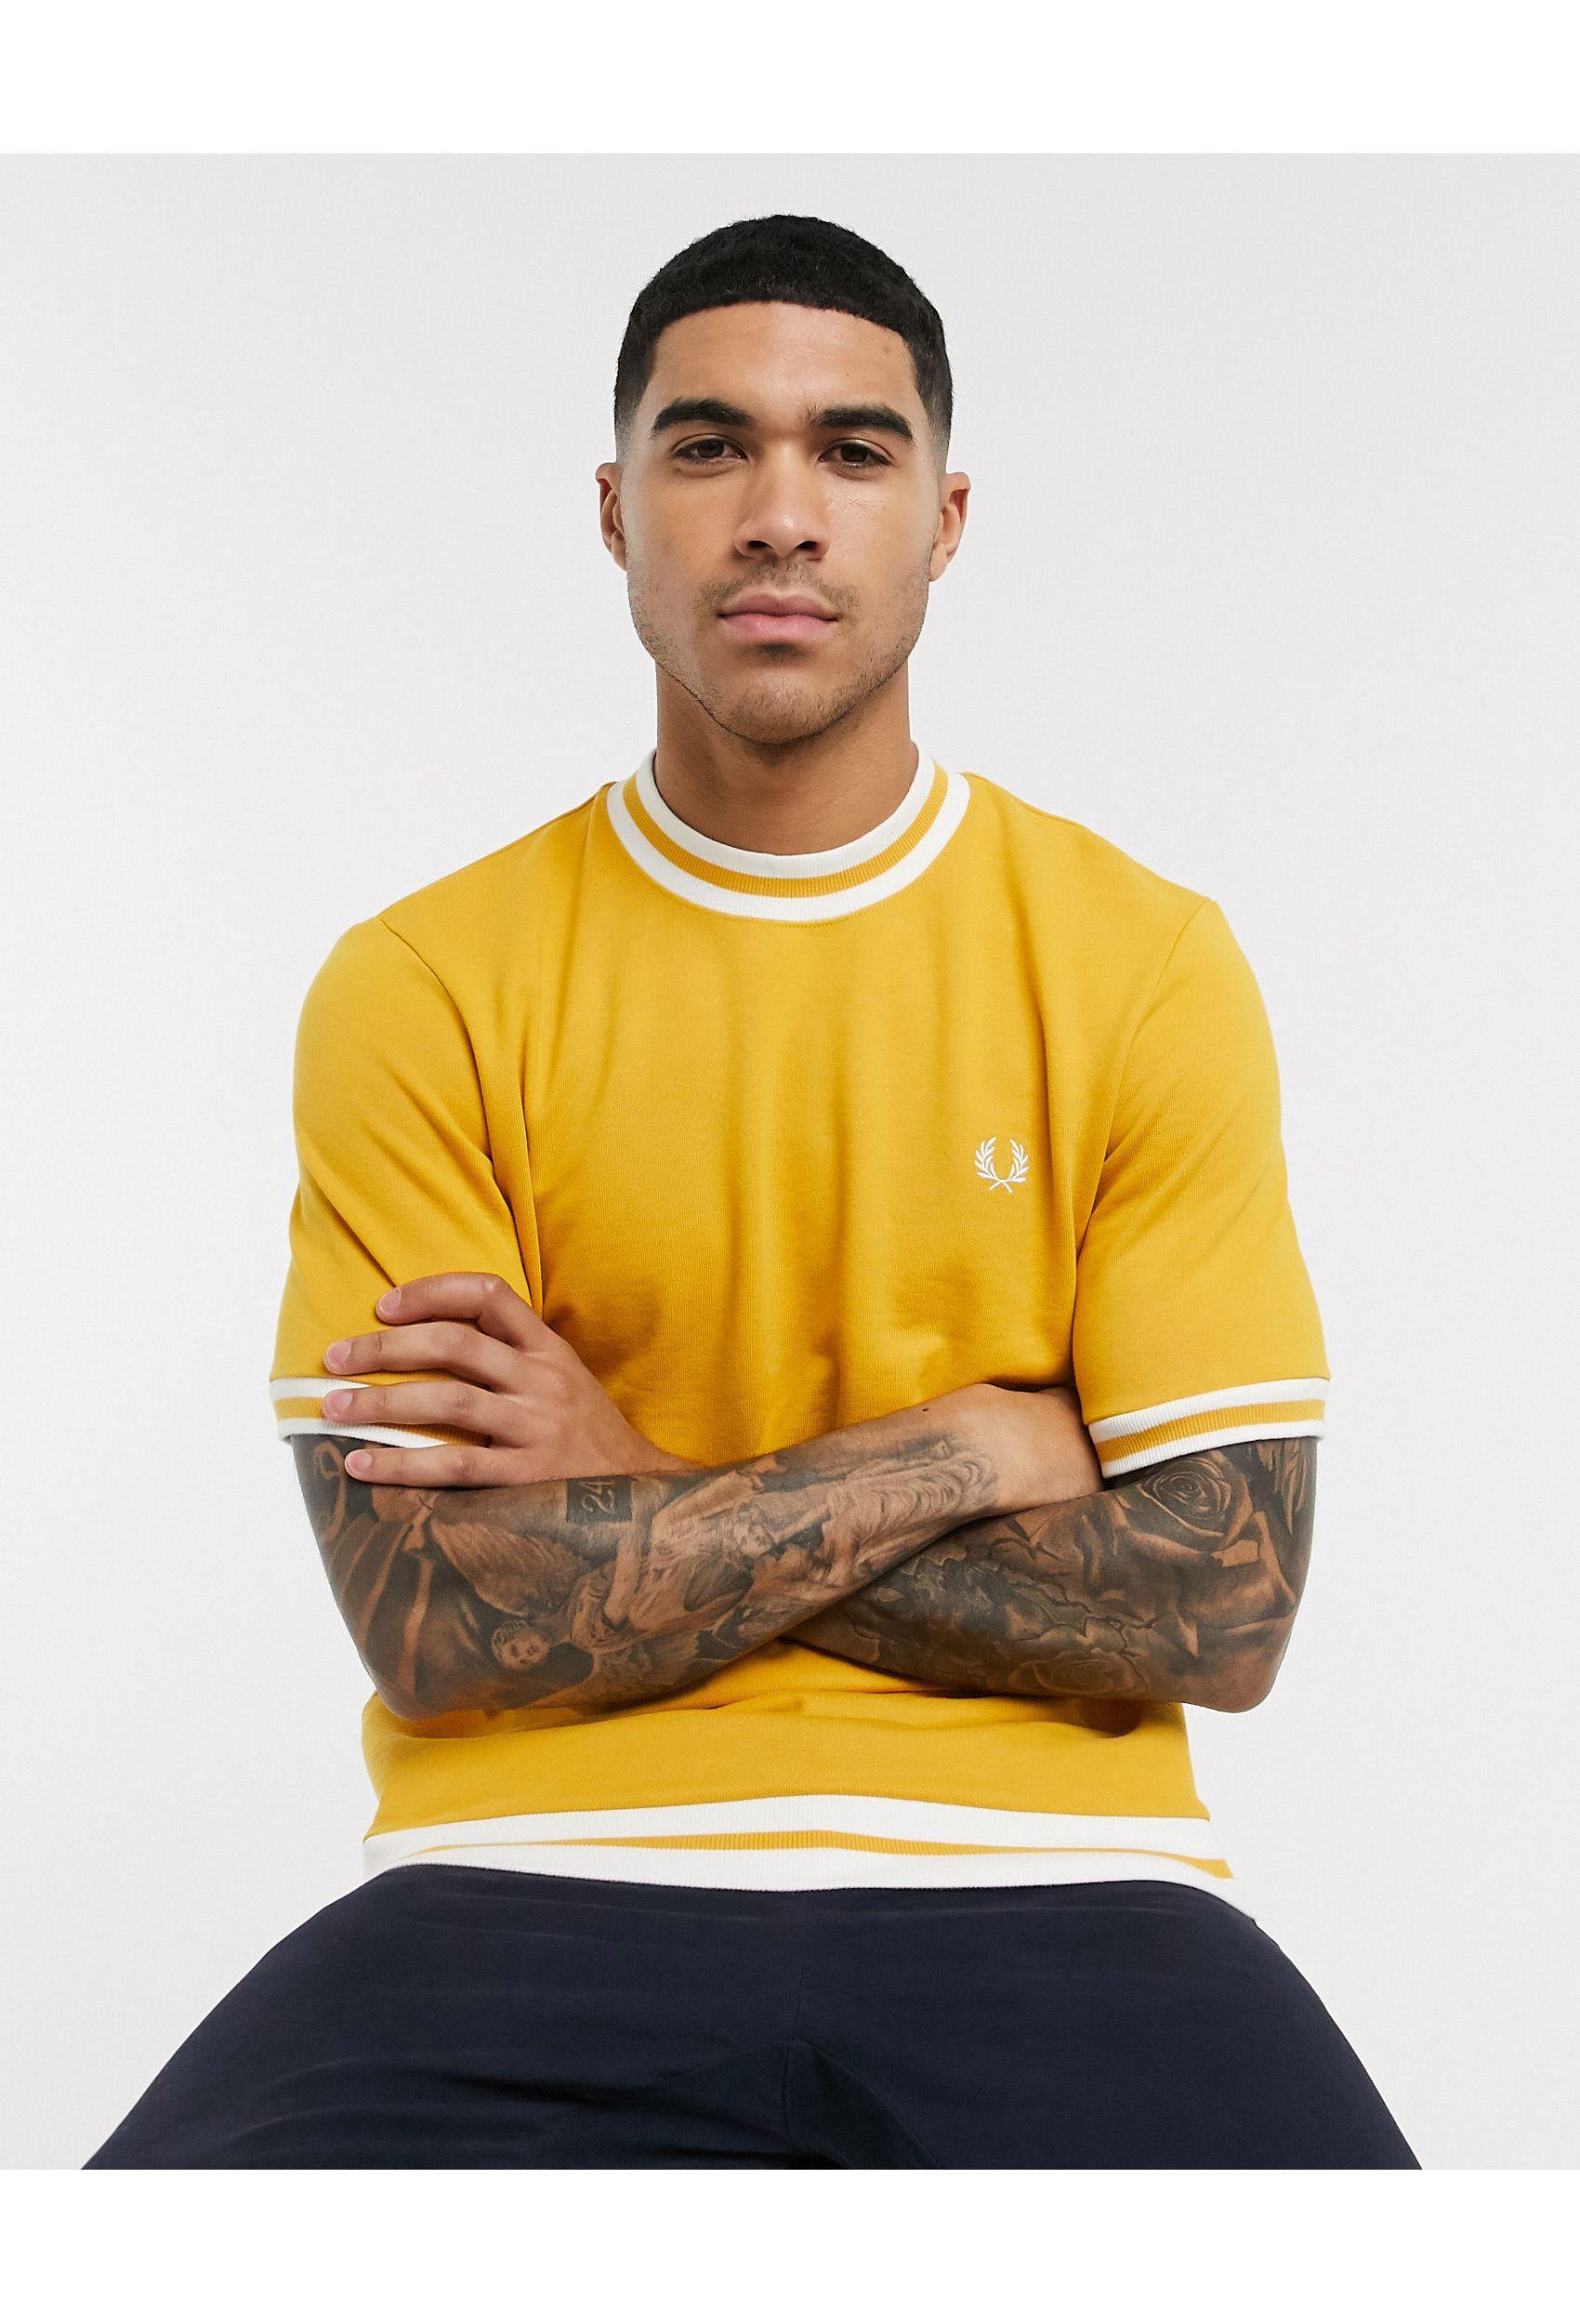 Fred Perry Cotton Oversized Large Twin Tipped Heavyweight T-shirt in Yellow  (Metallic) for Men - Lyst